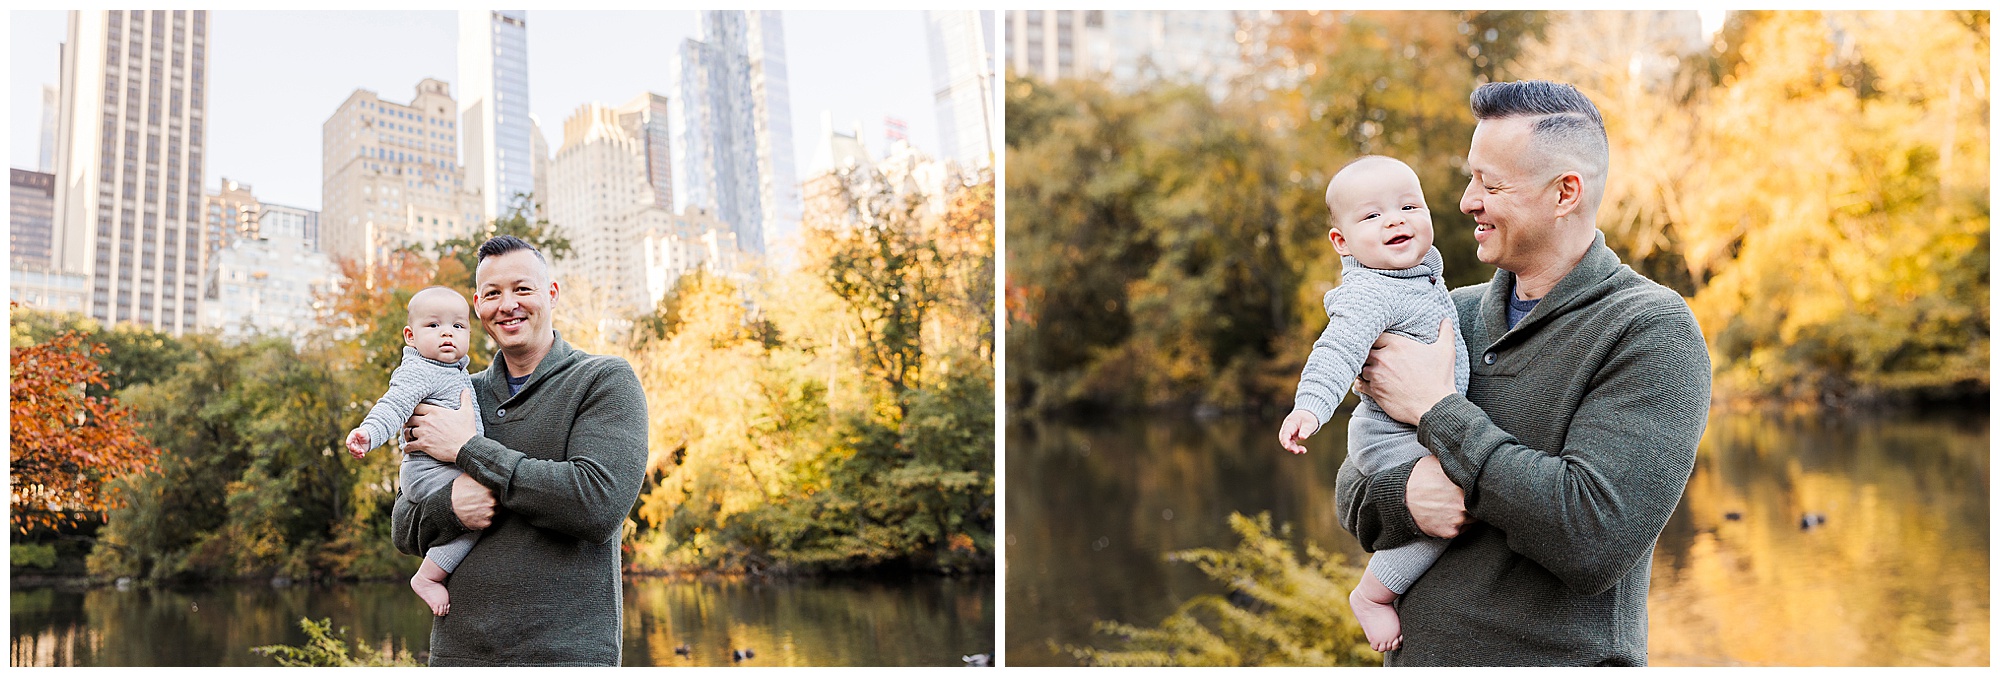 natural family photos in new york central park